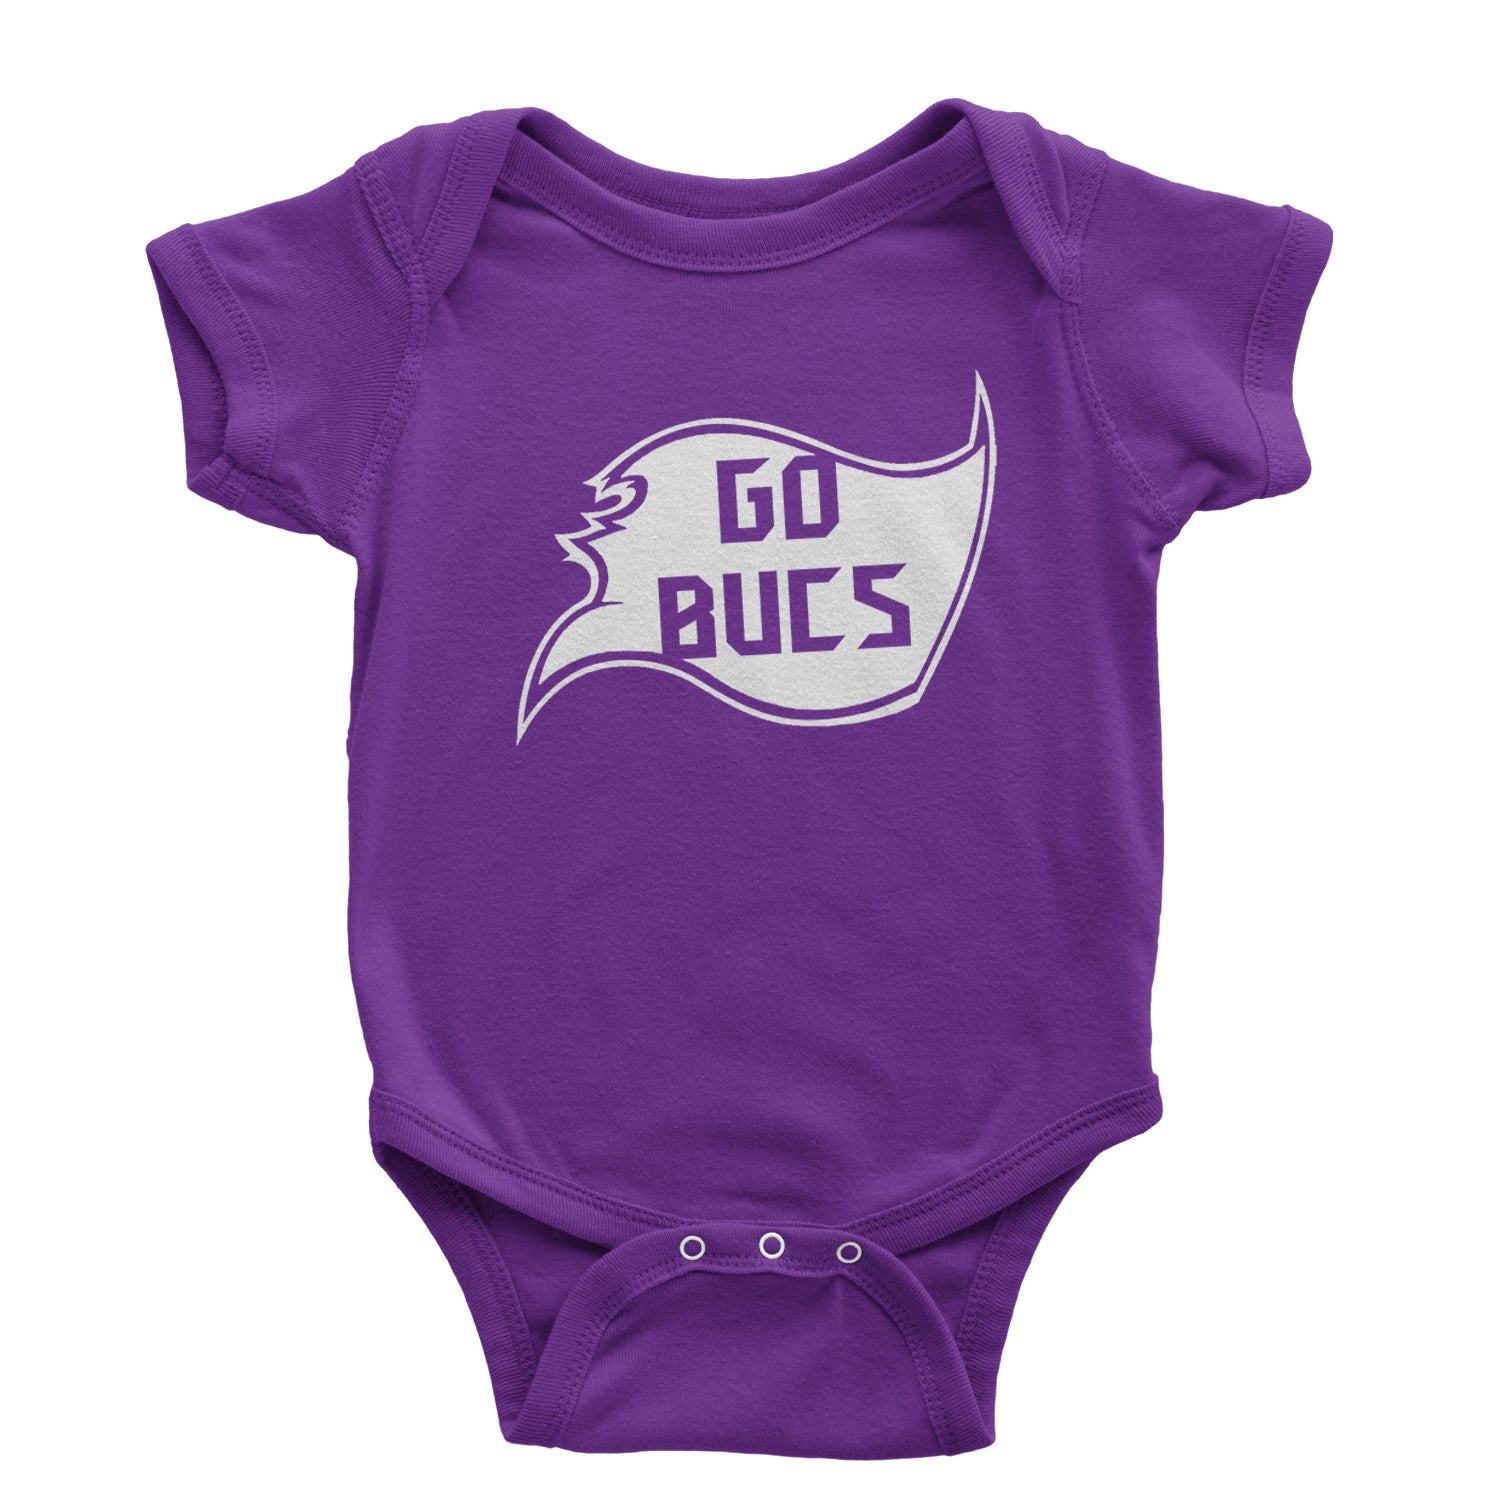 Go Bucs Buccaneers Infant One-Piece Romper Bodysuit and Toddler T-shirt ball, flag, foot, raise, tampa, the by Expression Tees